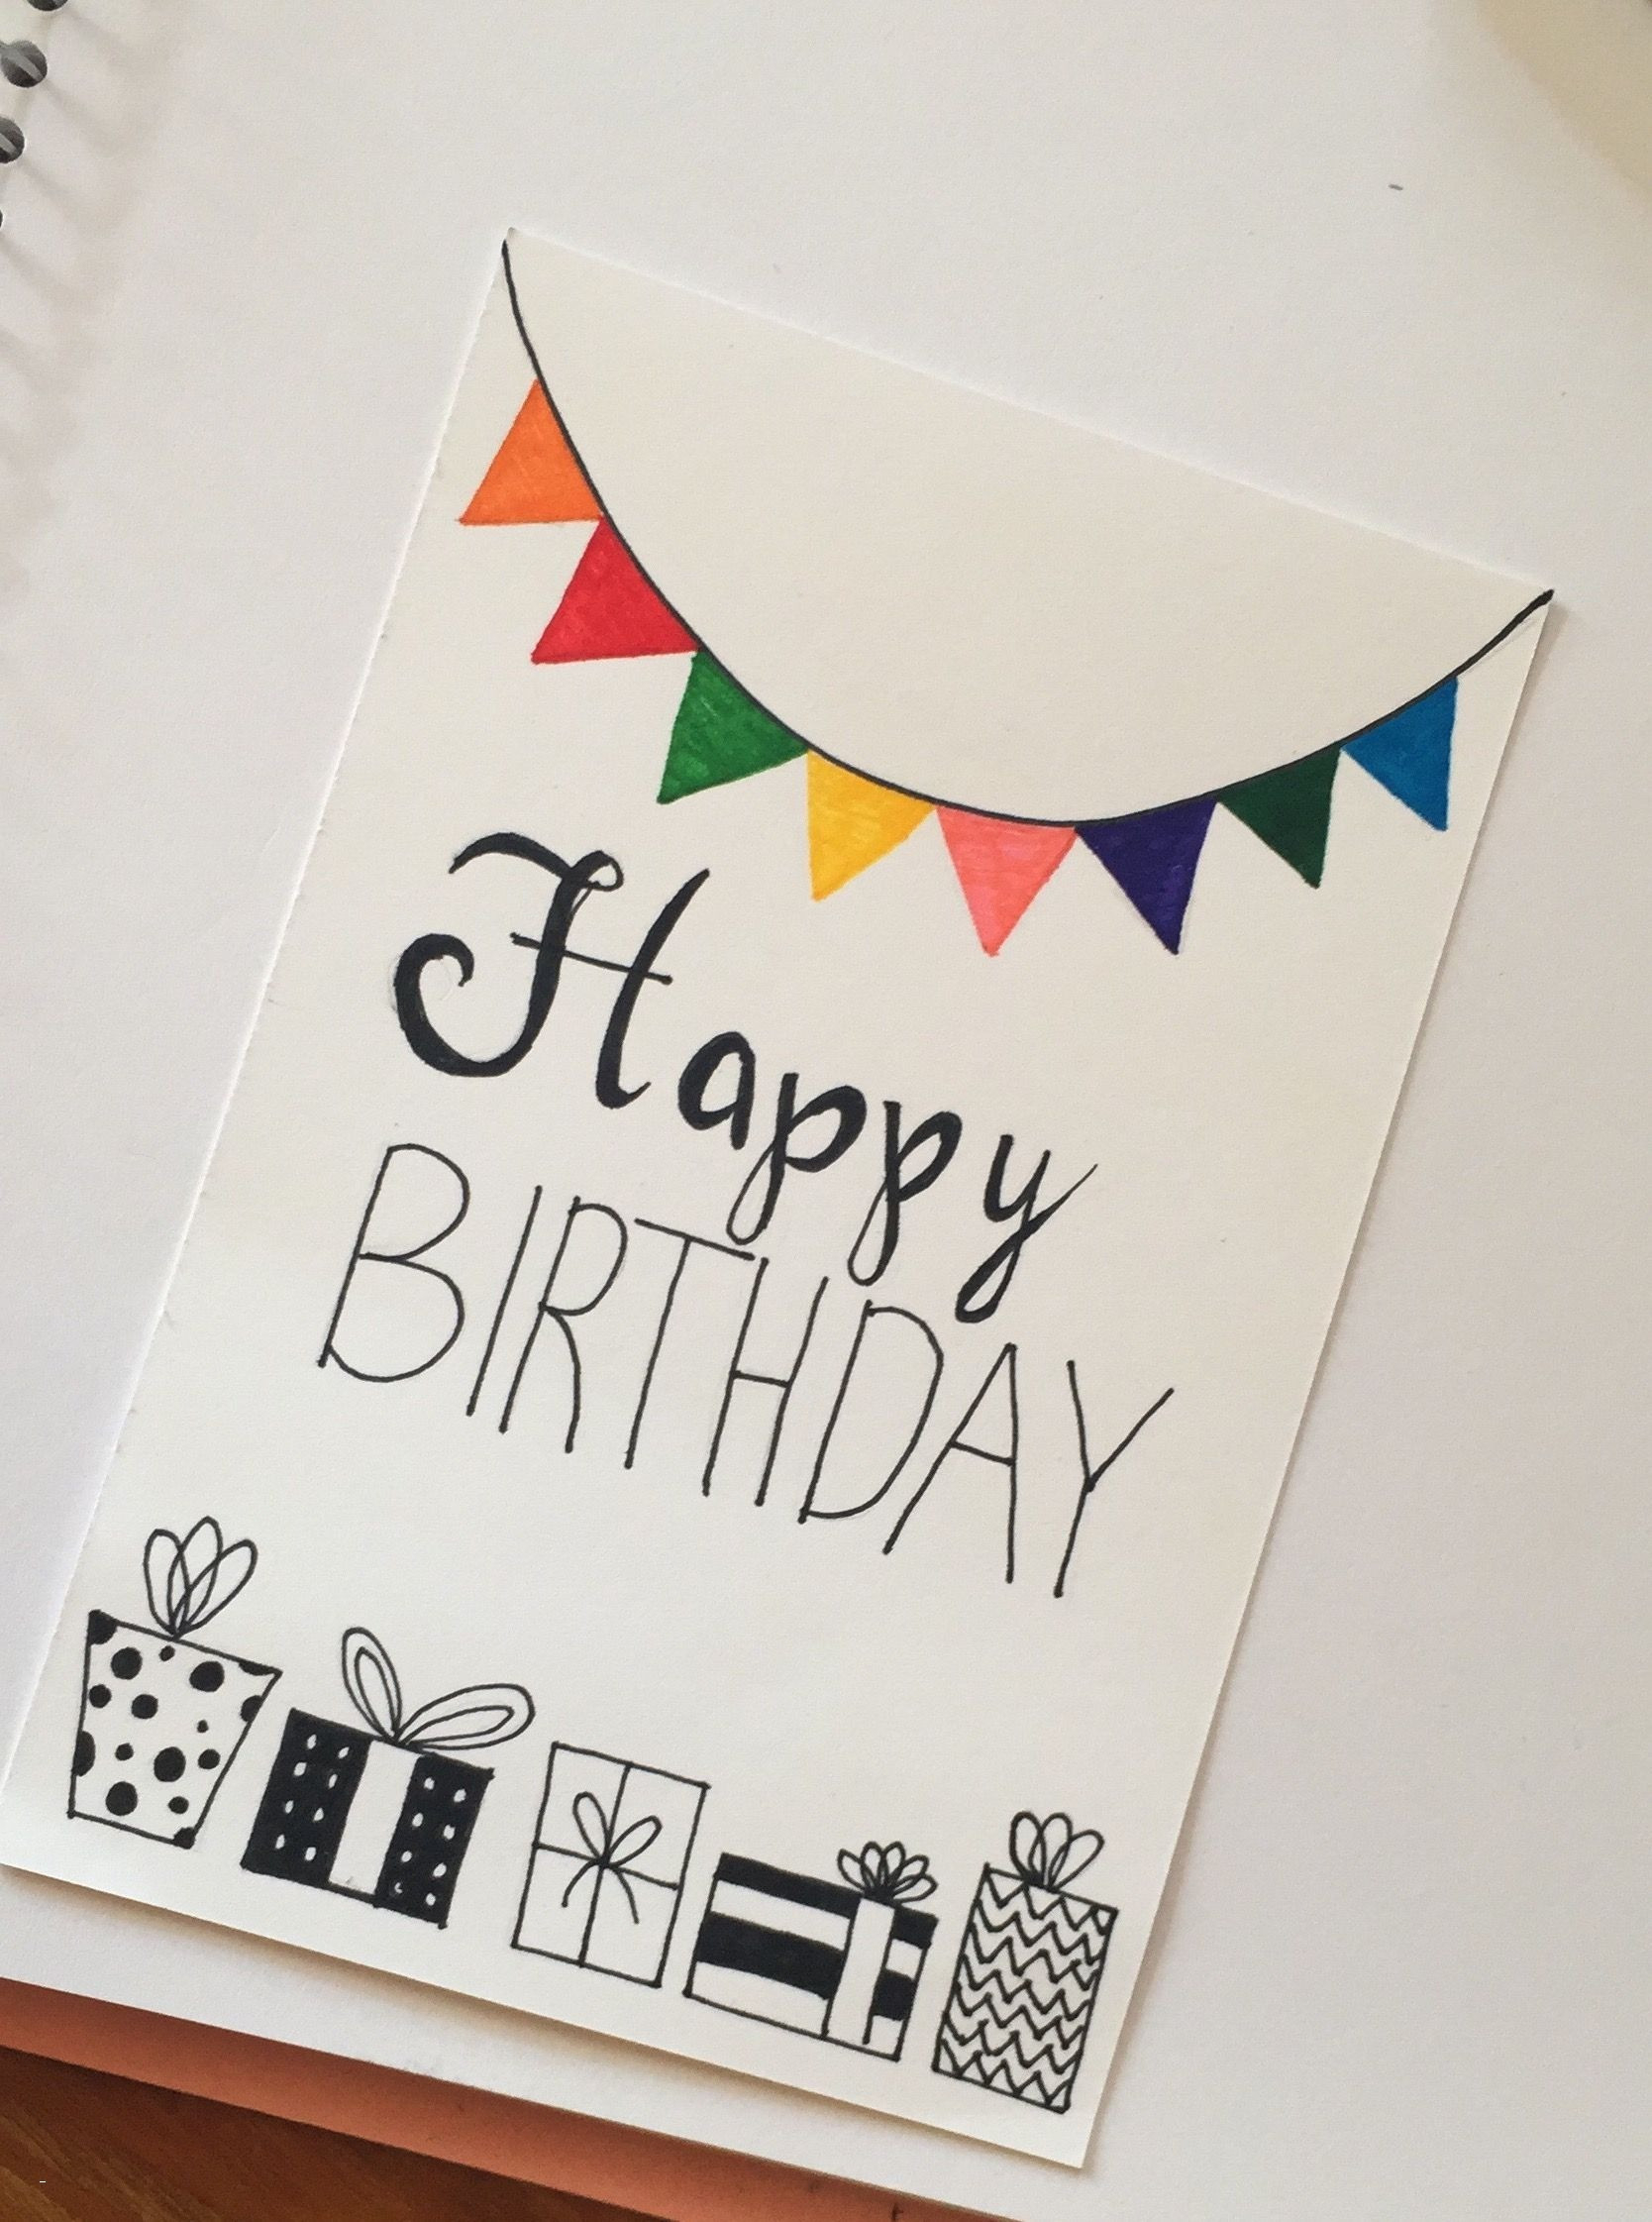 Card Ideas For Dads Birthday Easy Dad Birthday Card Ideas For From Child Wording Text A S